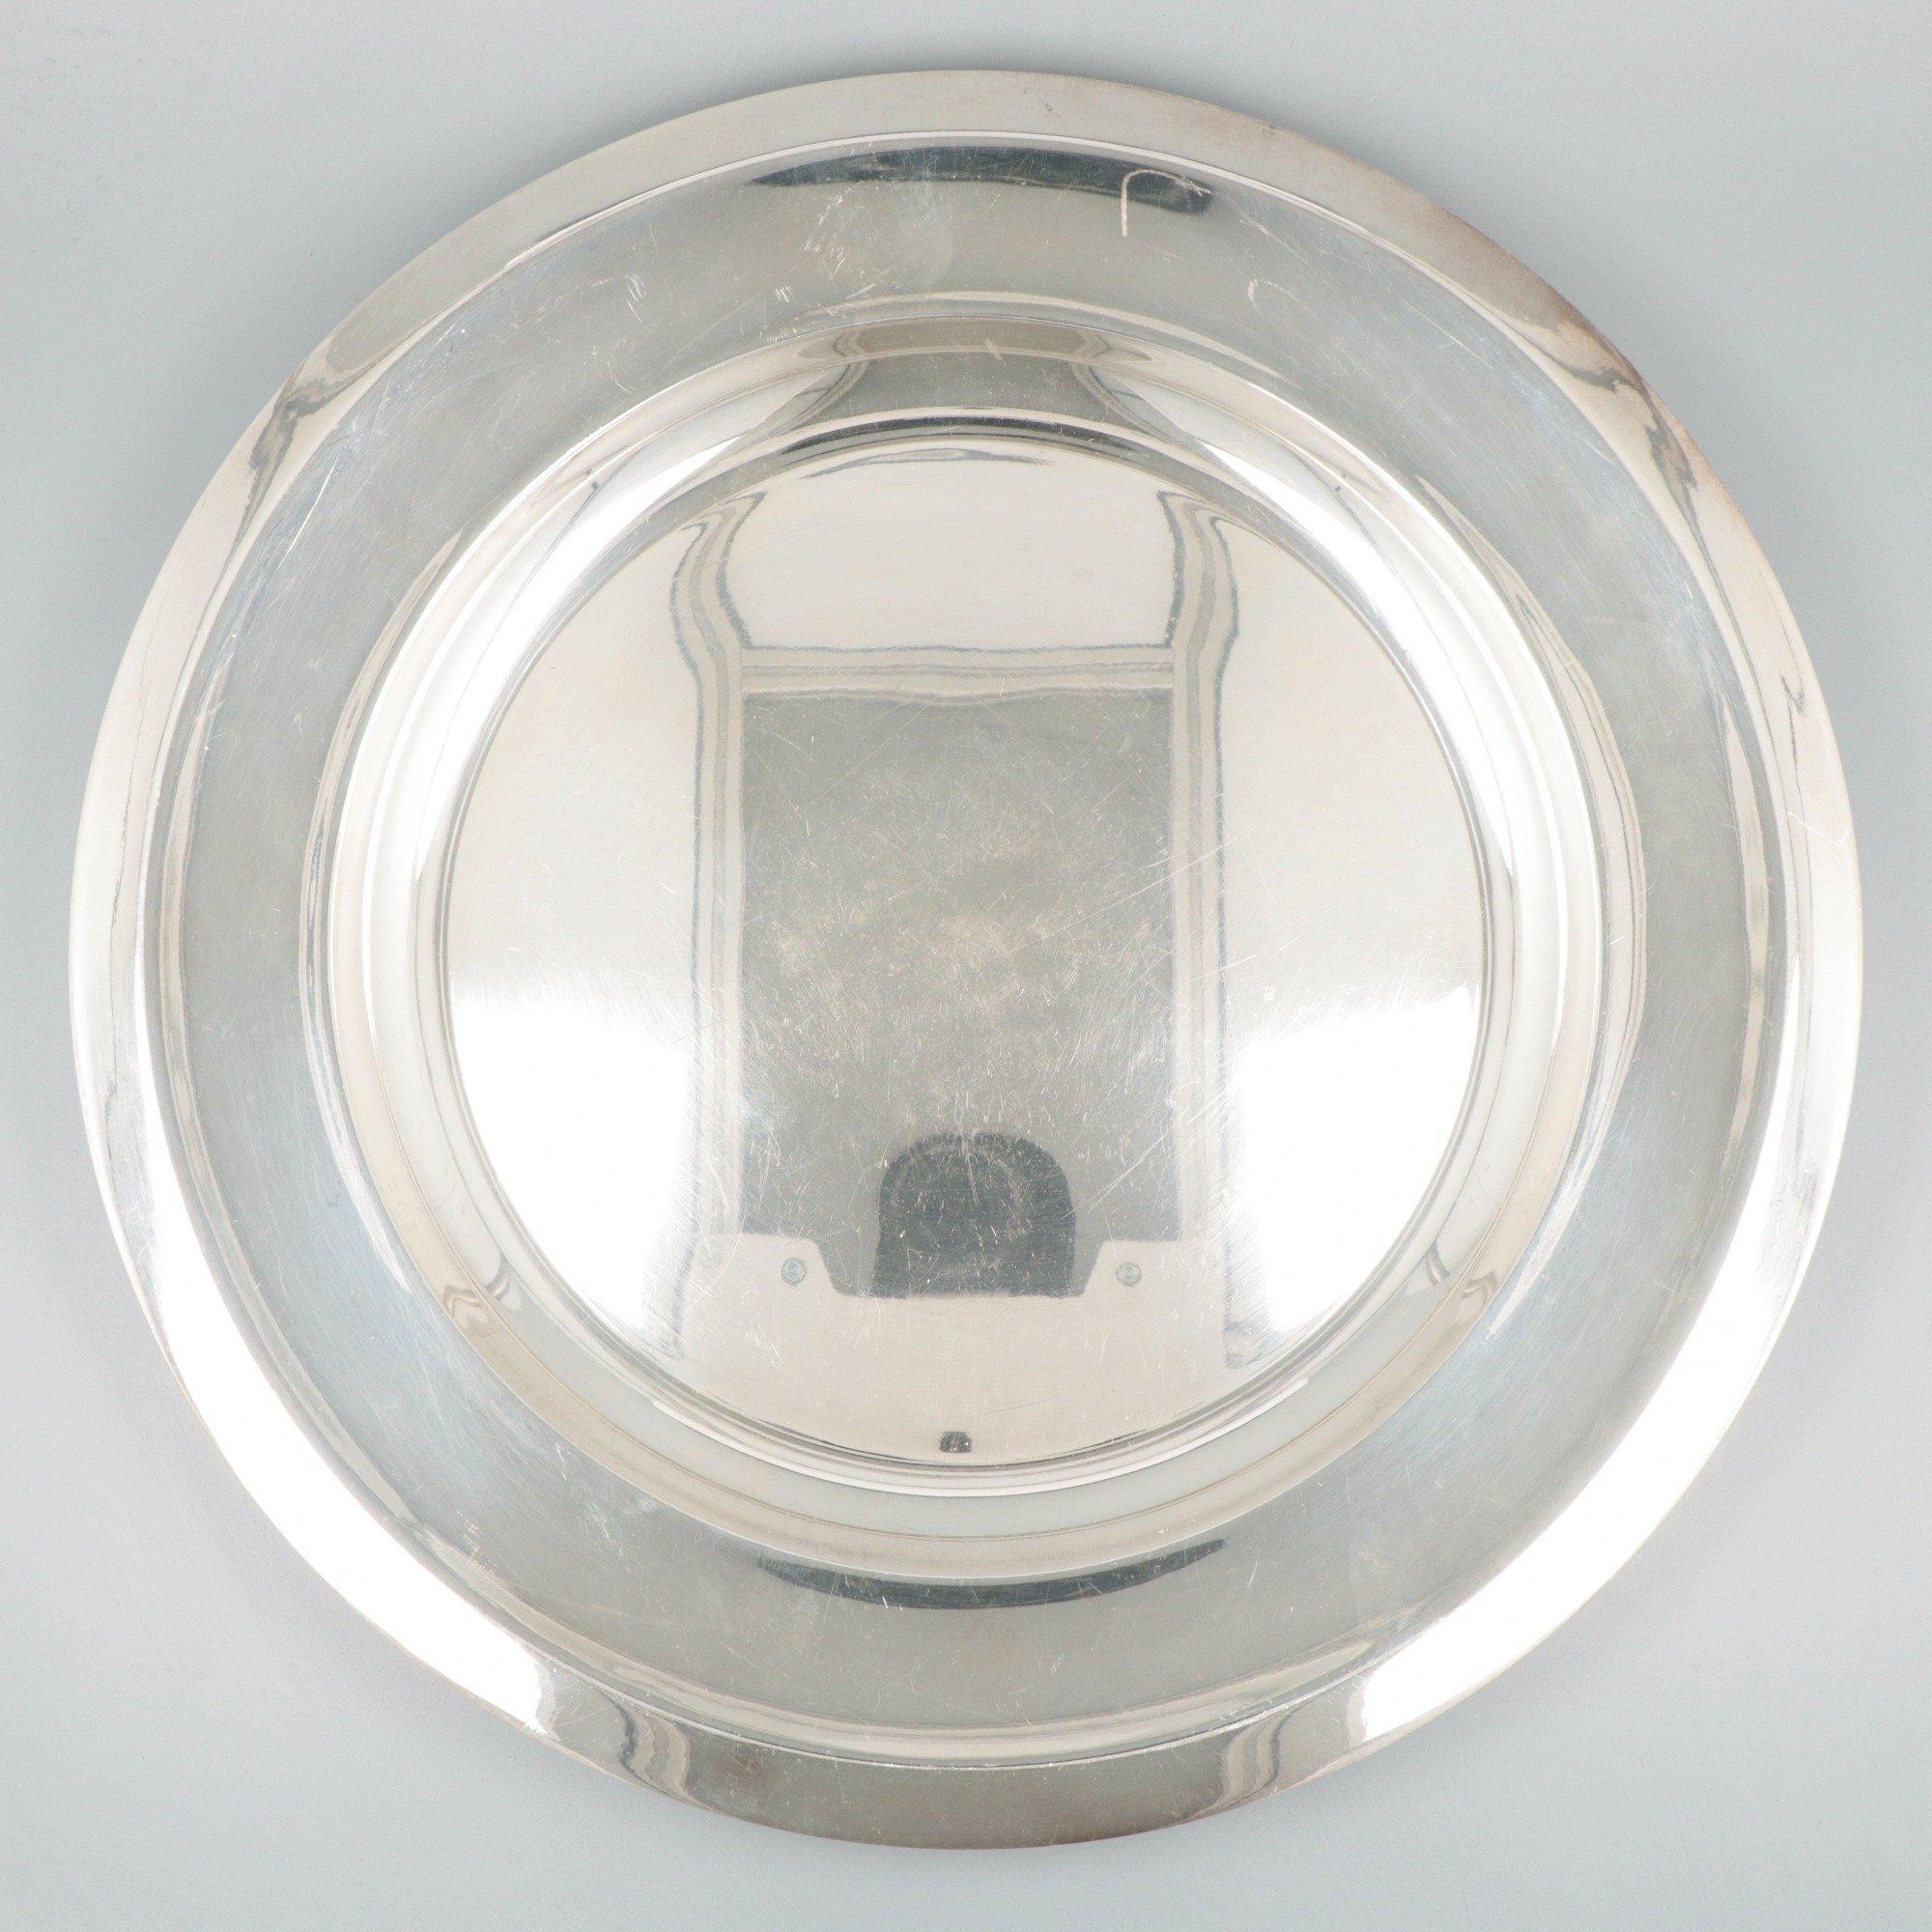 Orfevrérie Christofle Silver Plated Serving Dish

I recently had the pleasure of acquiring the Orfevrérie Christofle Silver Plated Serving Dish, and I must say, it is a true gem for any discerning collector or lover of fine tableware. This